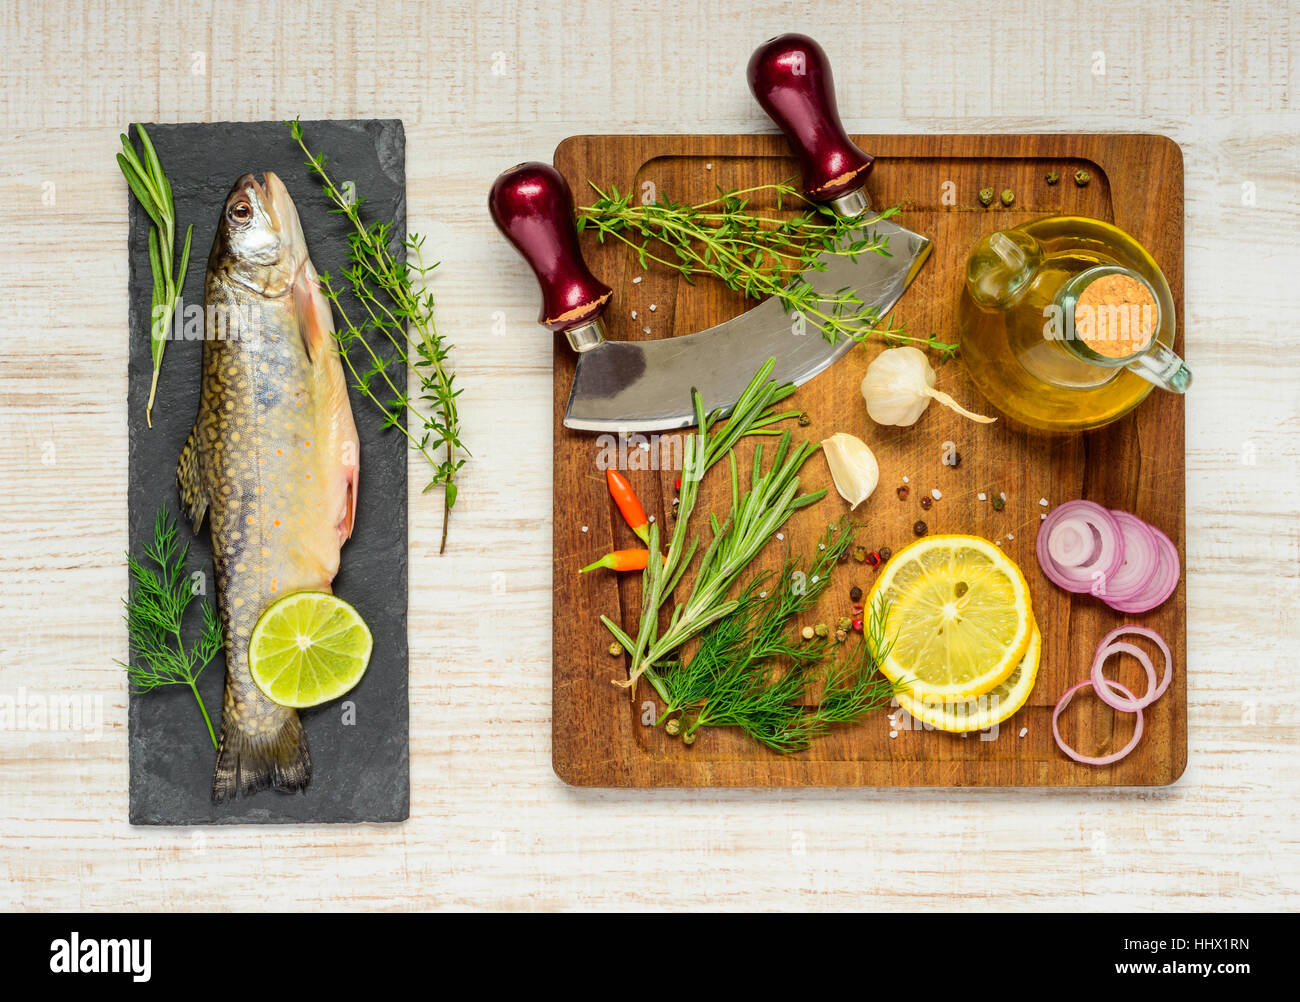 Raw Rainbow Trout Fish with Cooking Ingredients Stock Photo